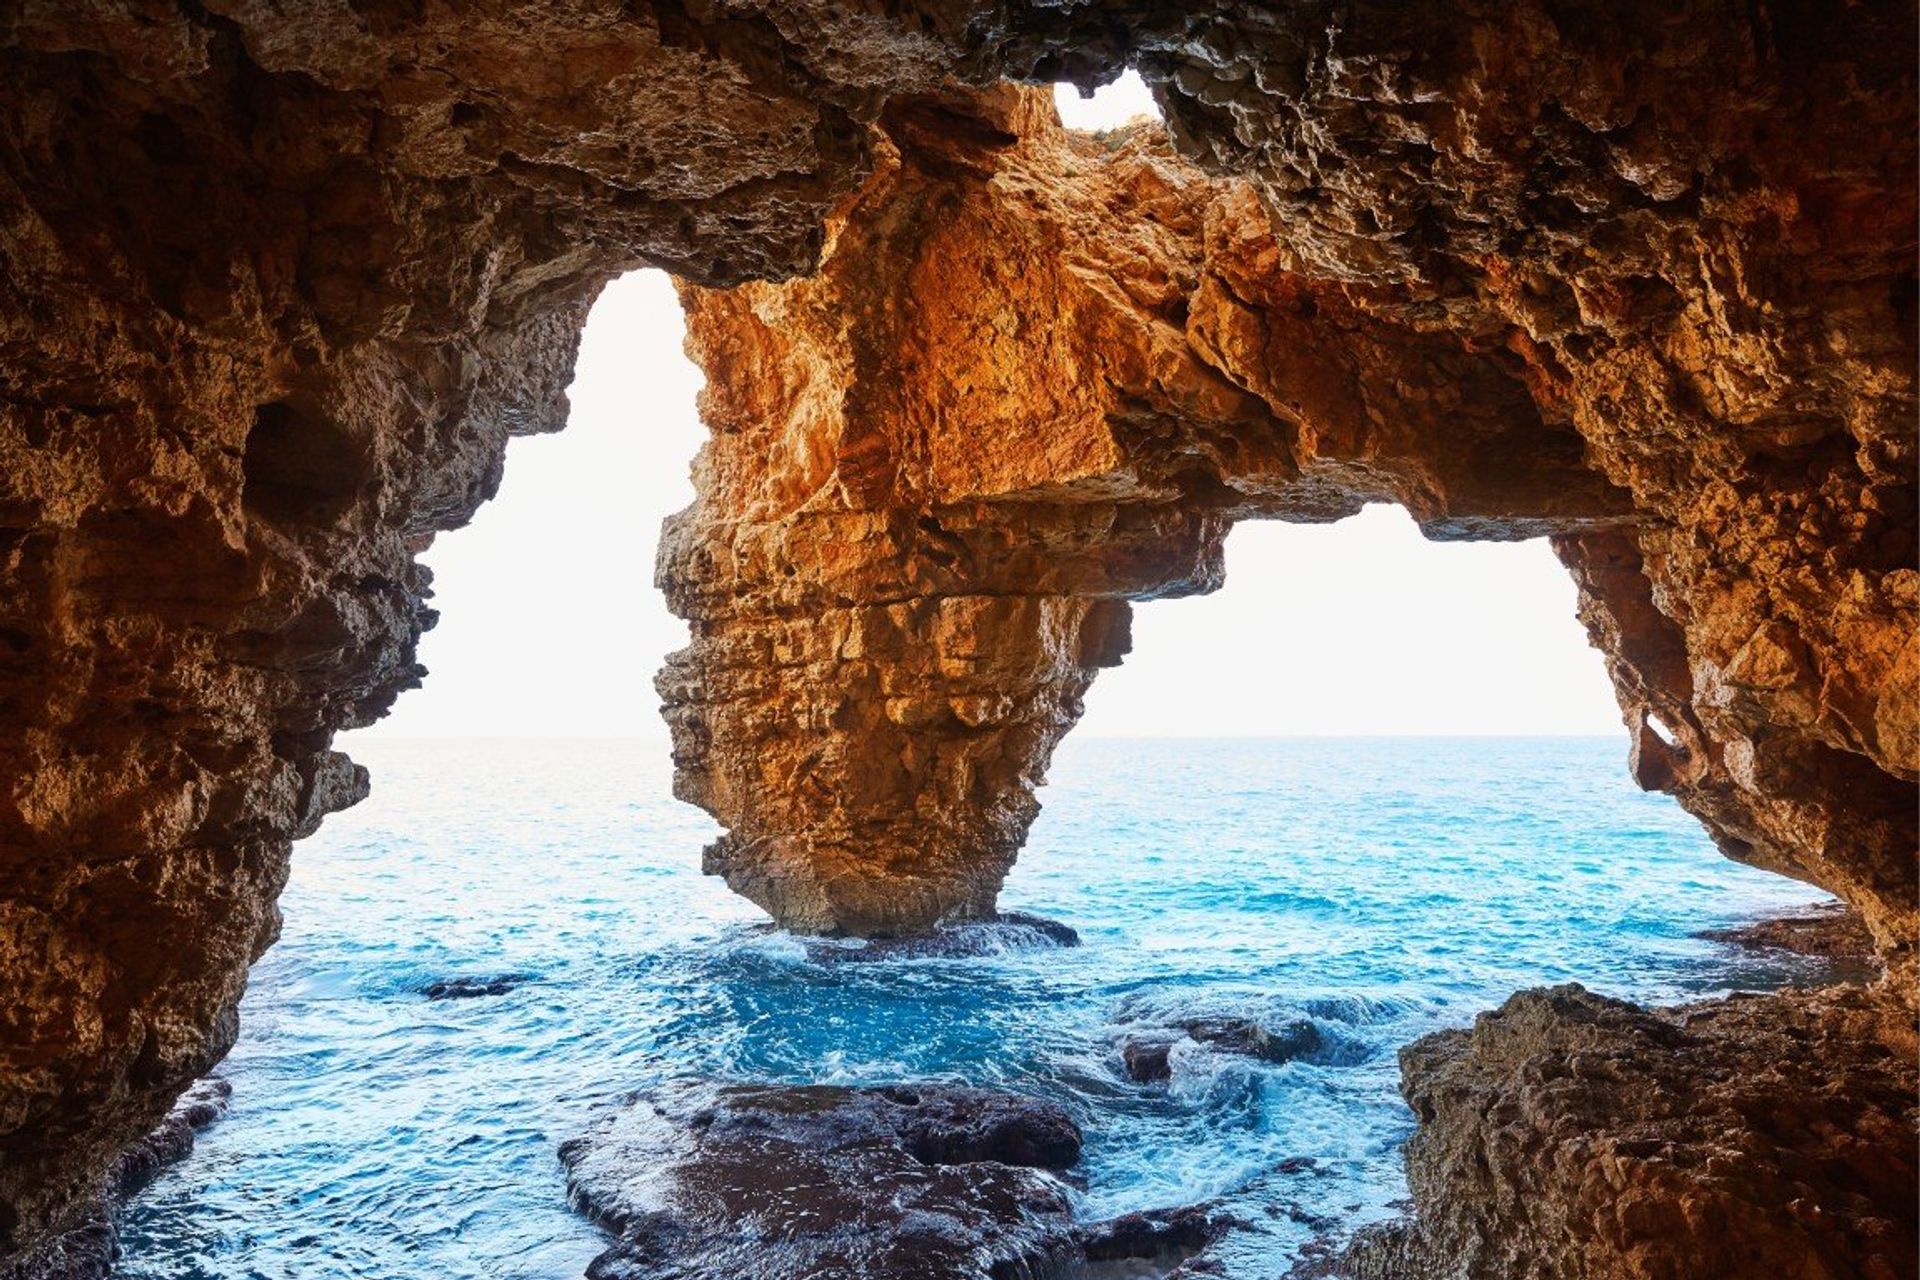 Cala del Moraig is the perfect diving and snorkeling spot, boasting some stunning caves